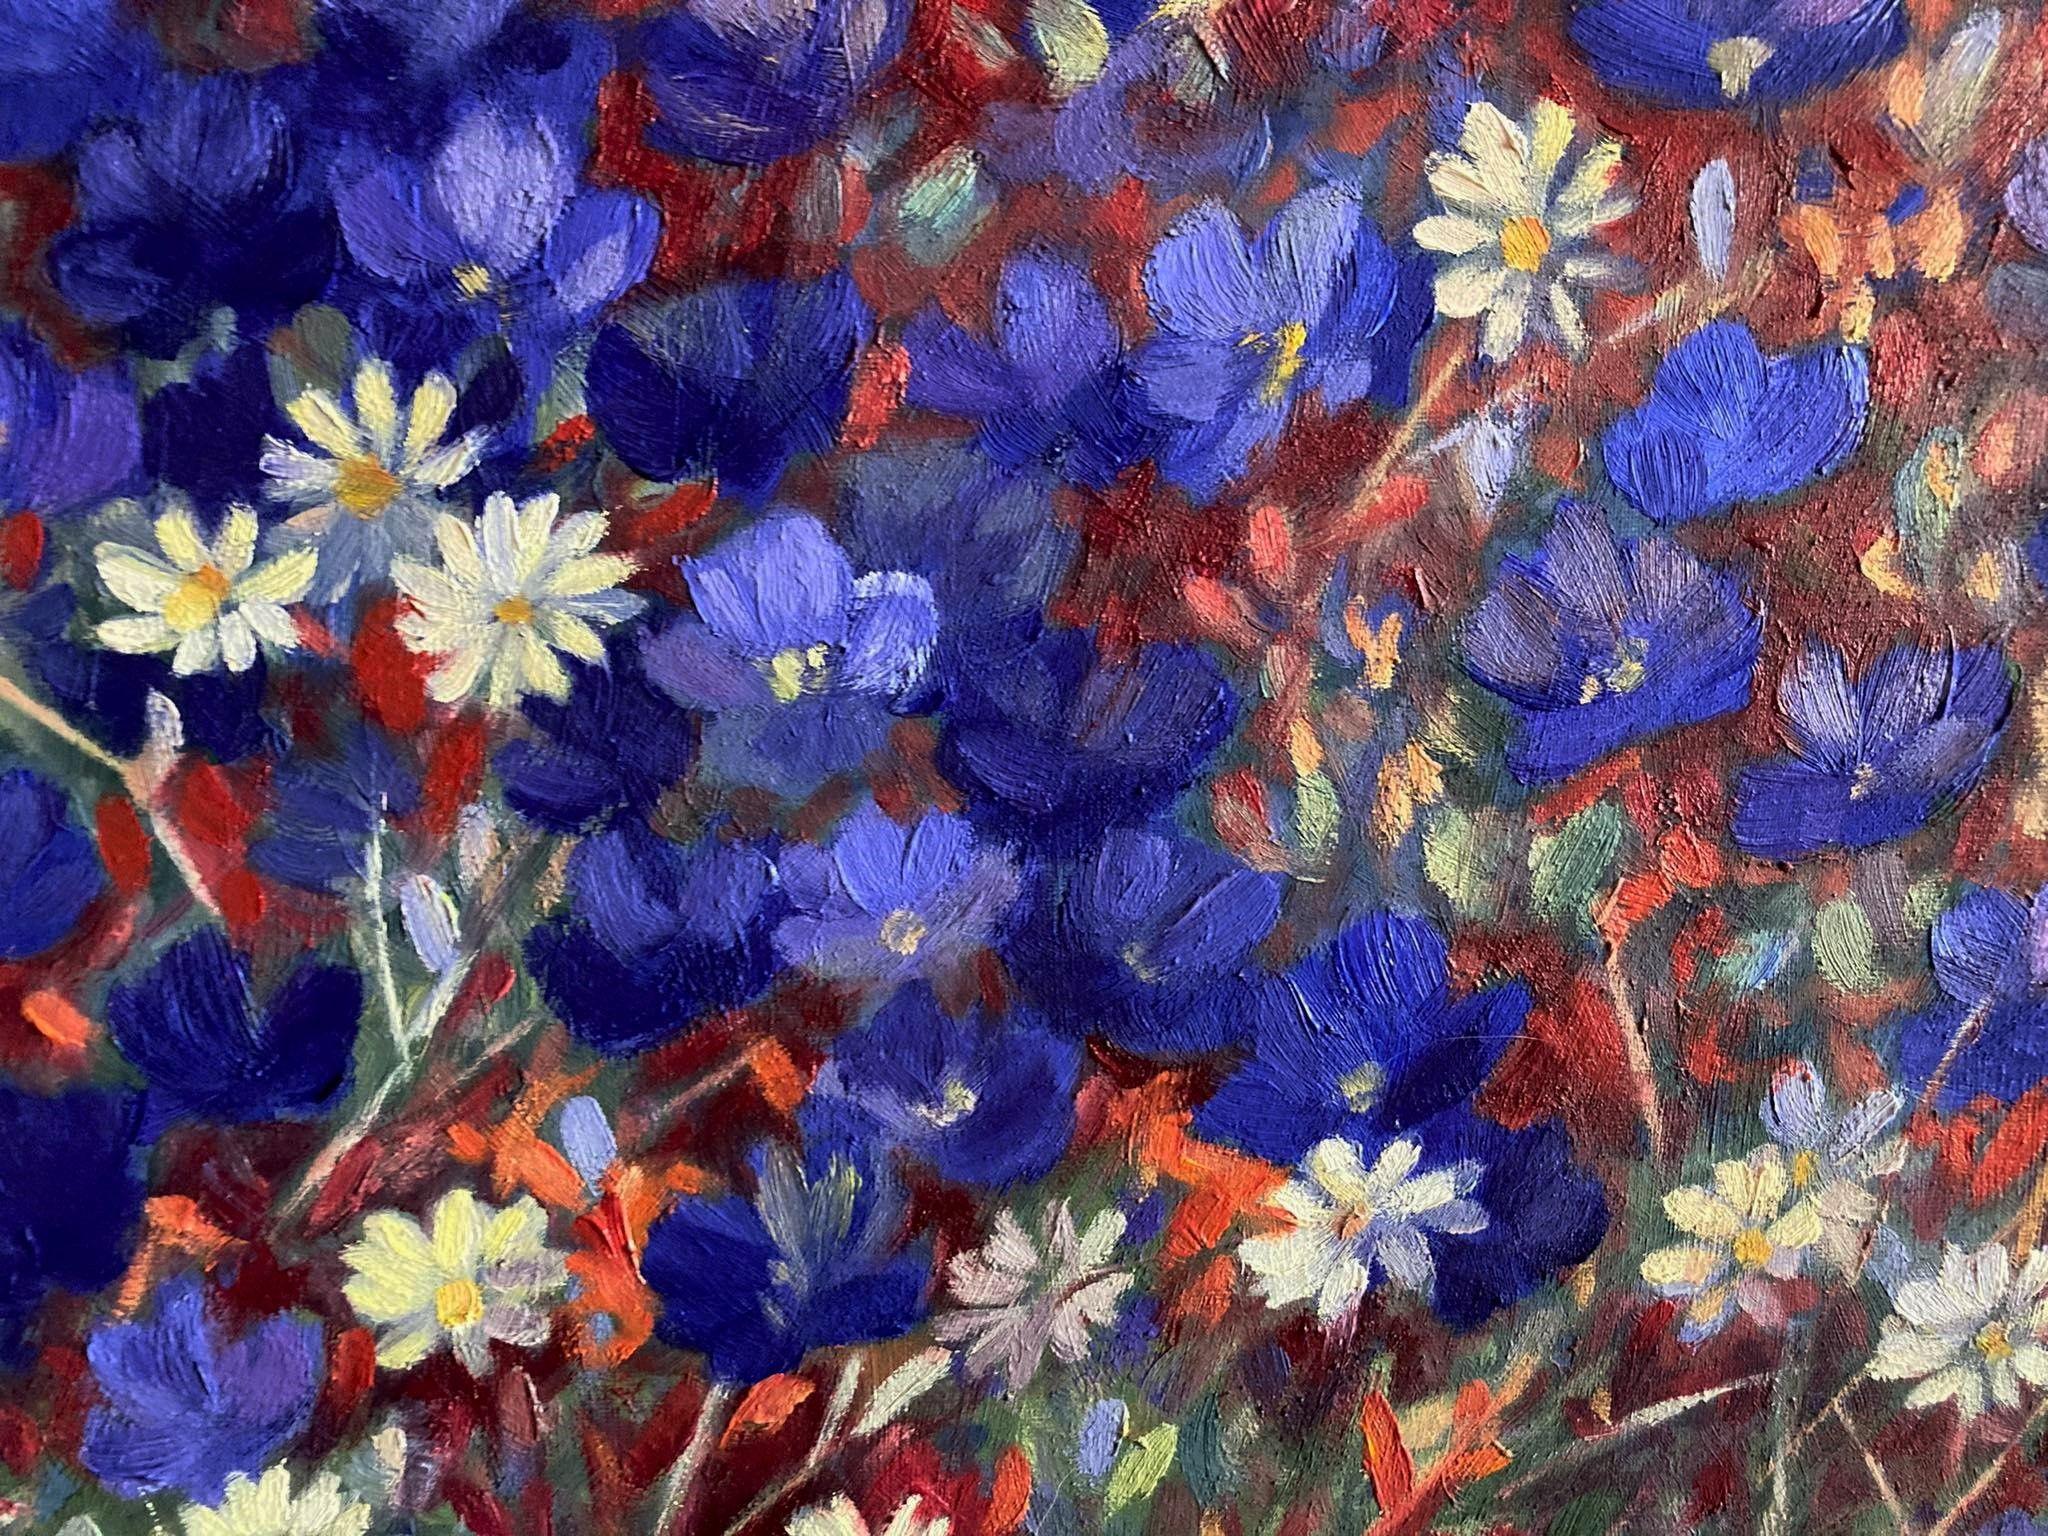 My art is about spring, vibrant and strong colors, contrasts - a foreplay between light and shadow :: Painting :: Impressionist :: This piece comes with an official certificate of authenticity signed by the artist :: Ready to Hang: Yes :: Signed: